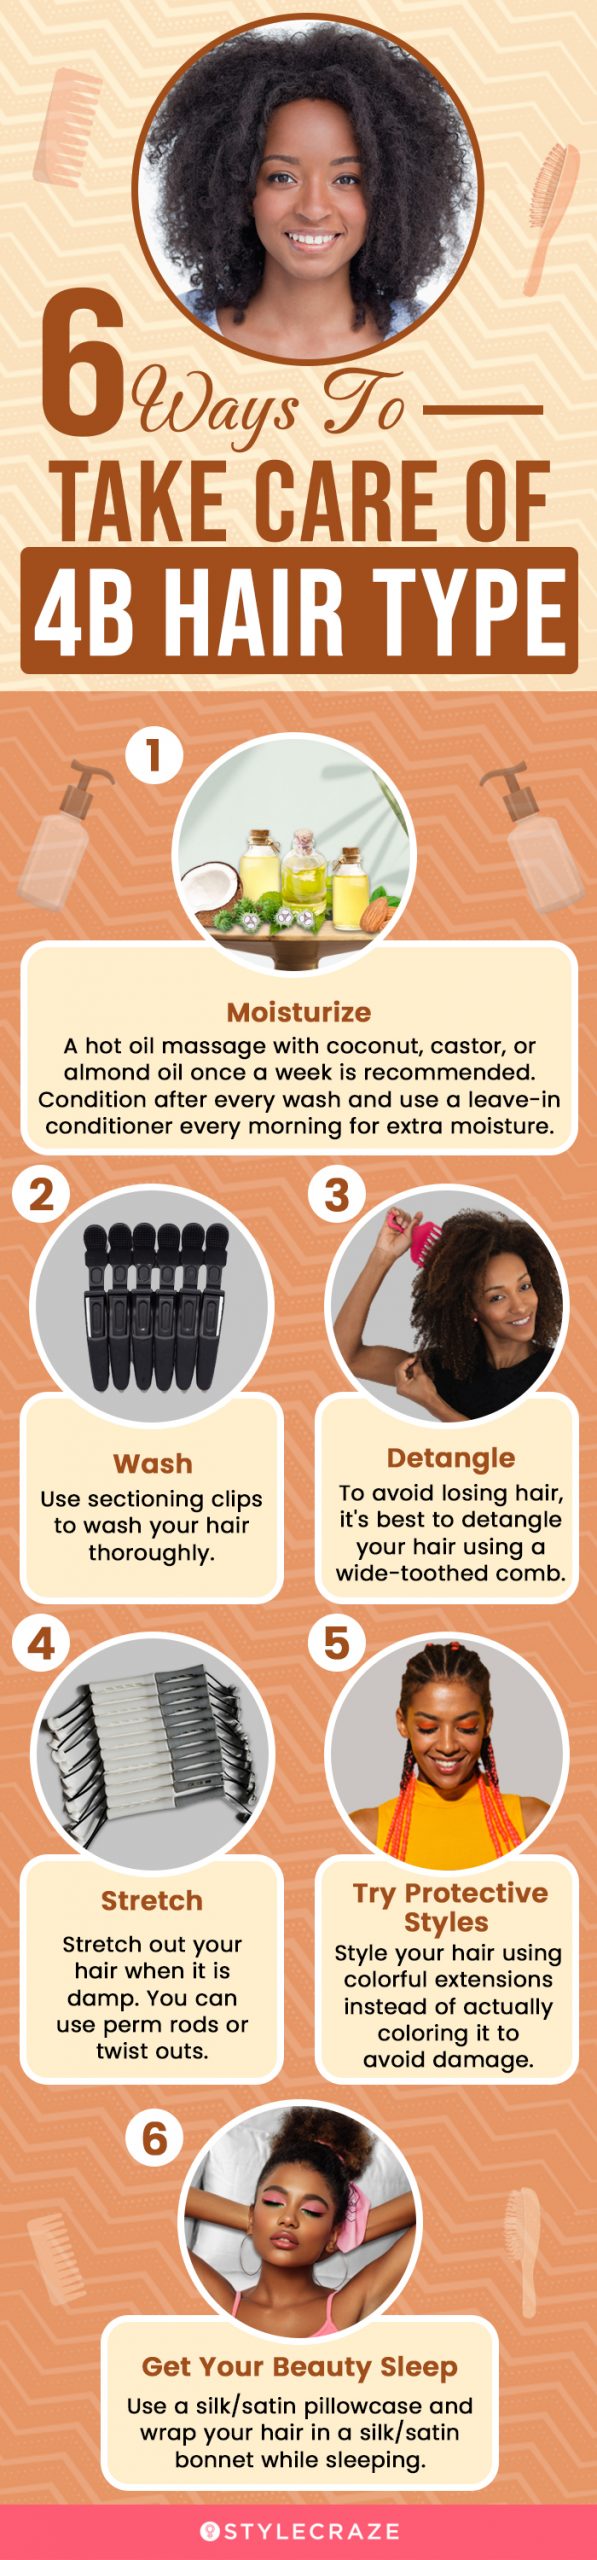 six ways to take care of 4b hair type (infographic)